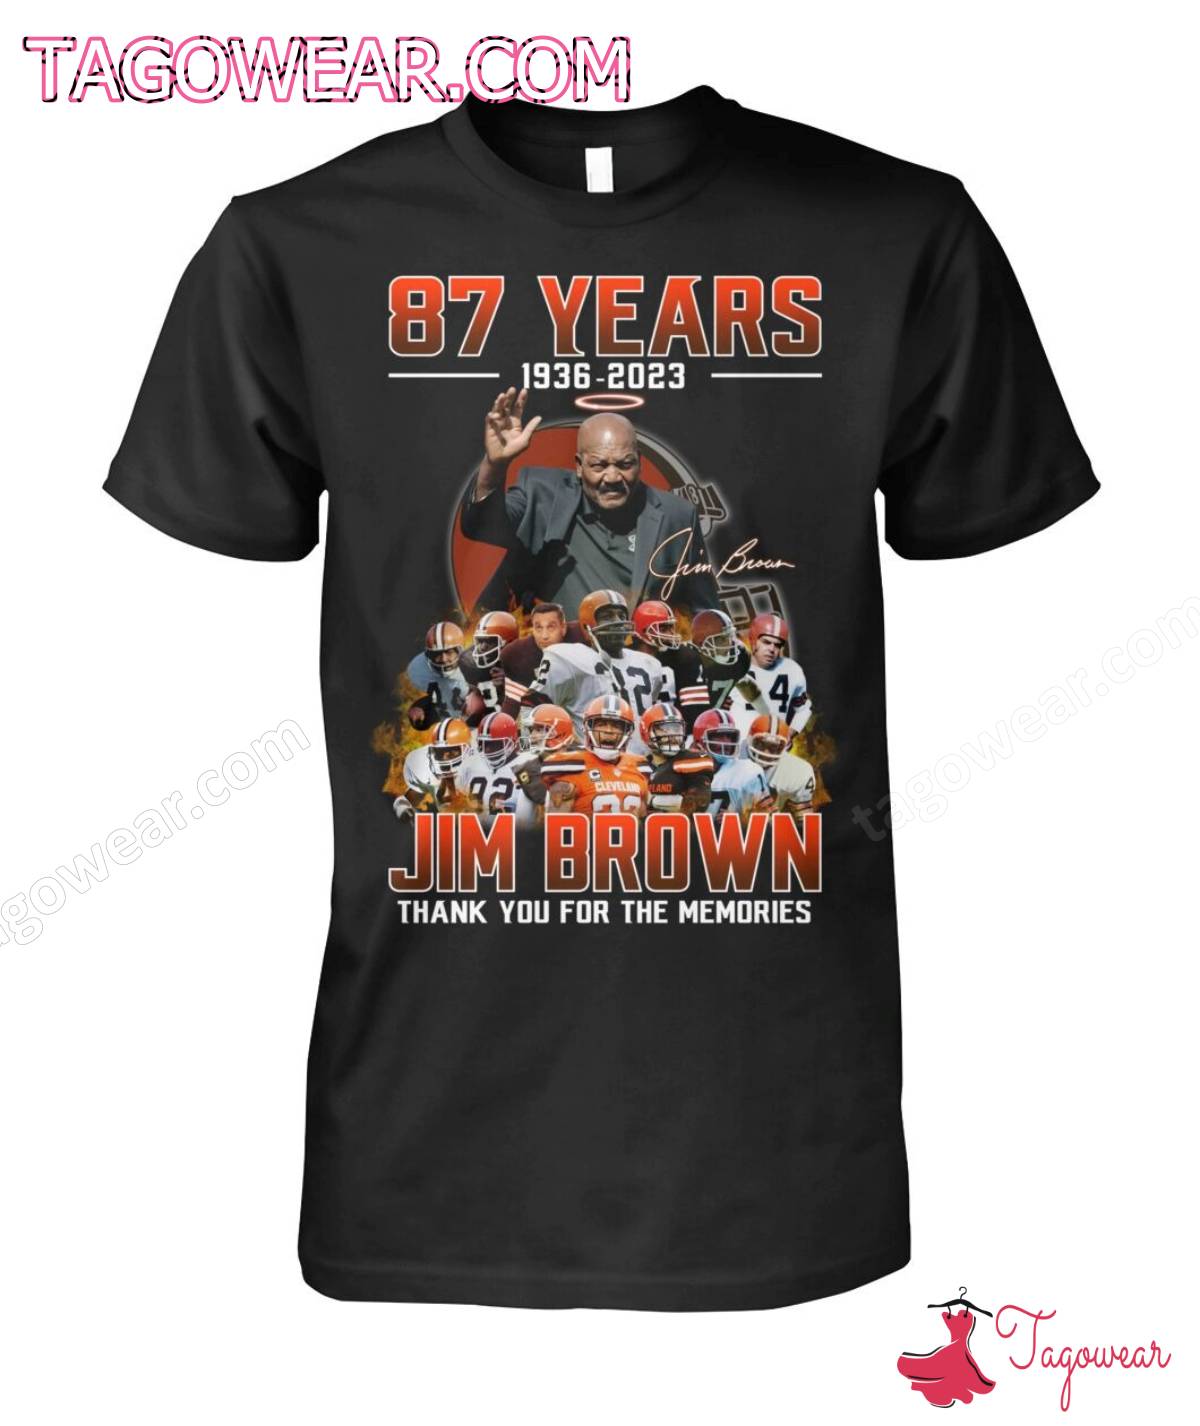 87 Years 1936-2023 Jim Brown Thank You For The Memories Shirt